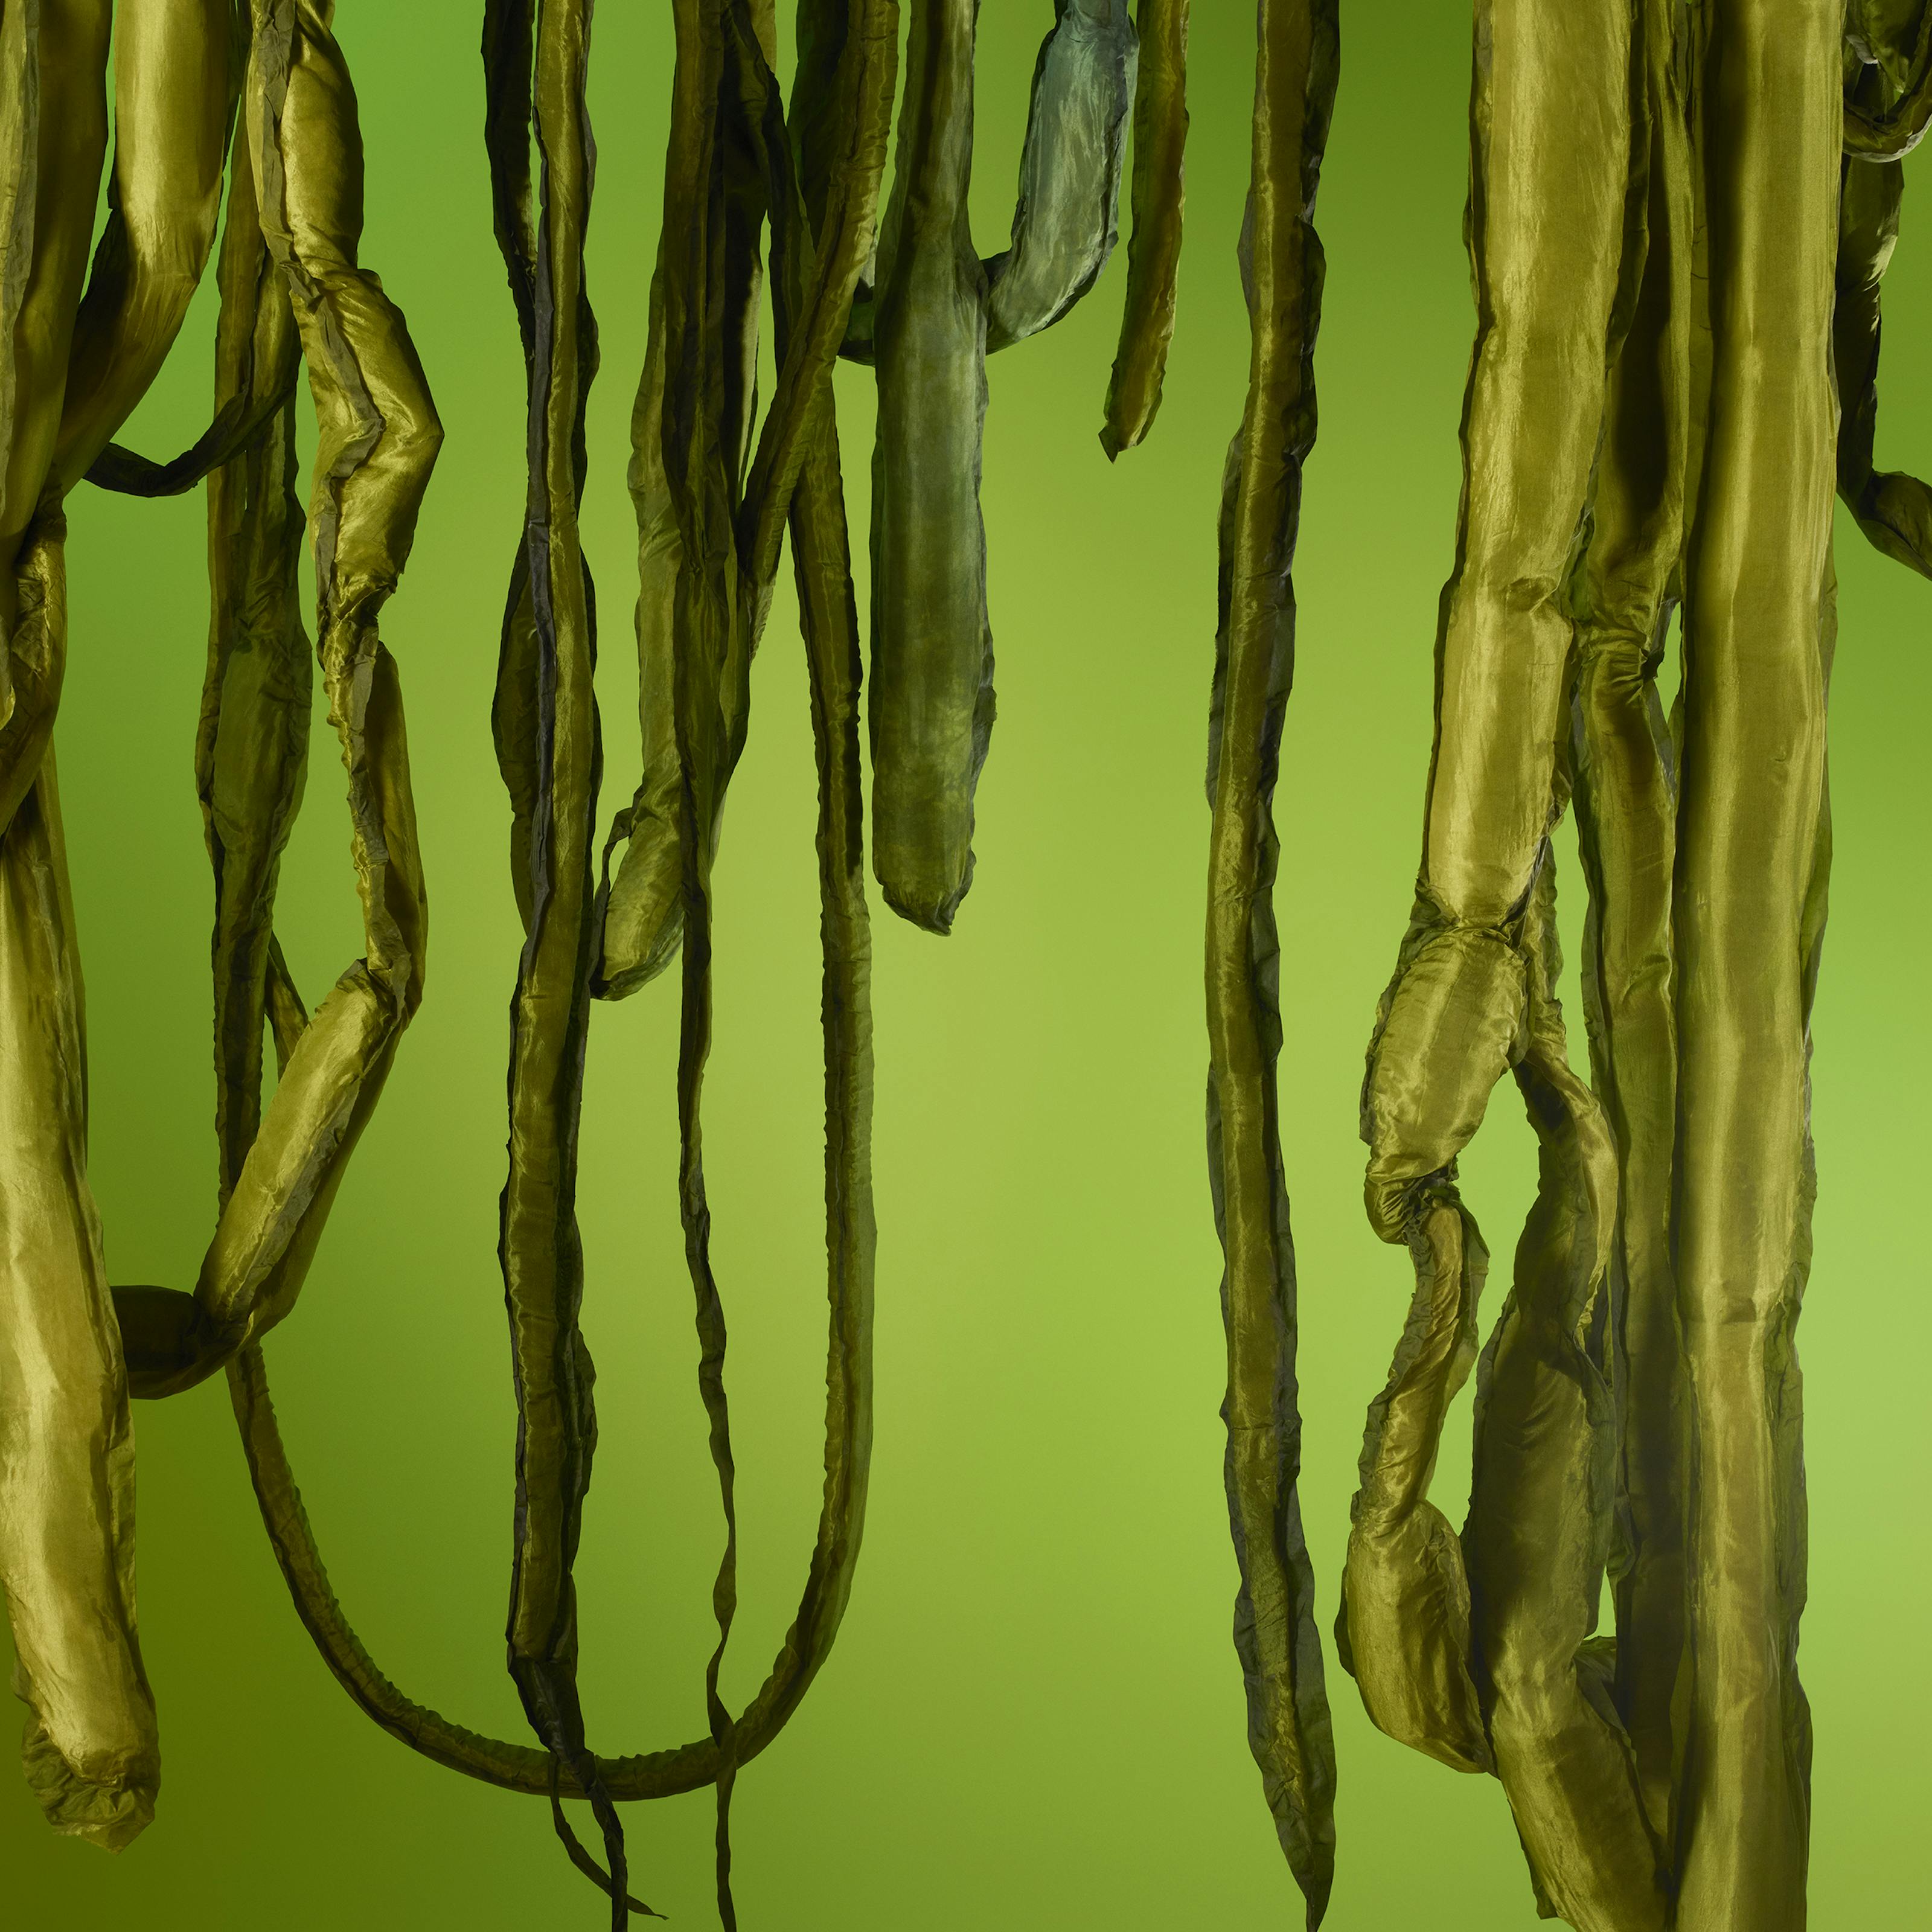 Long tangled tendrils hang in loops and strands in a plant-like structure suggesting a vine. A Great Seaweed Day: Gut Weed (Ulva Intestinalis) is a mixed media sculpture by Ingela Ihrman.